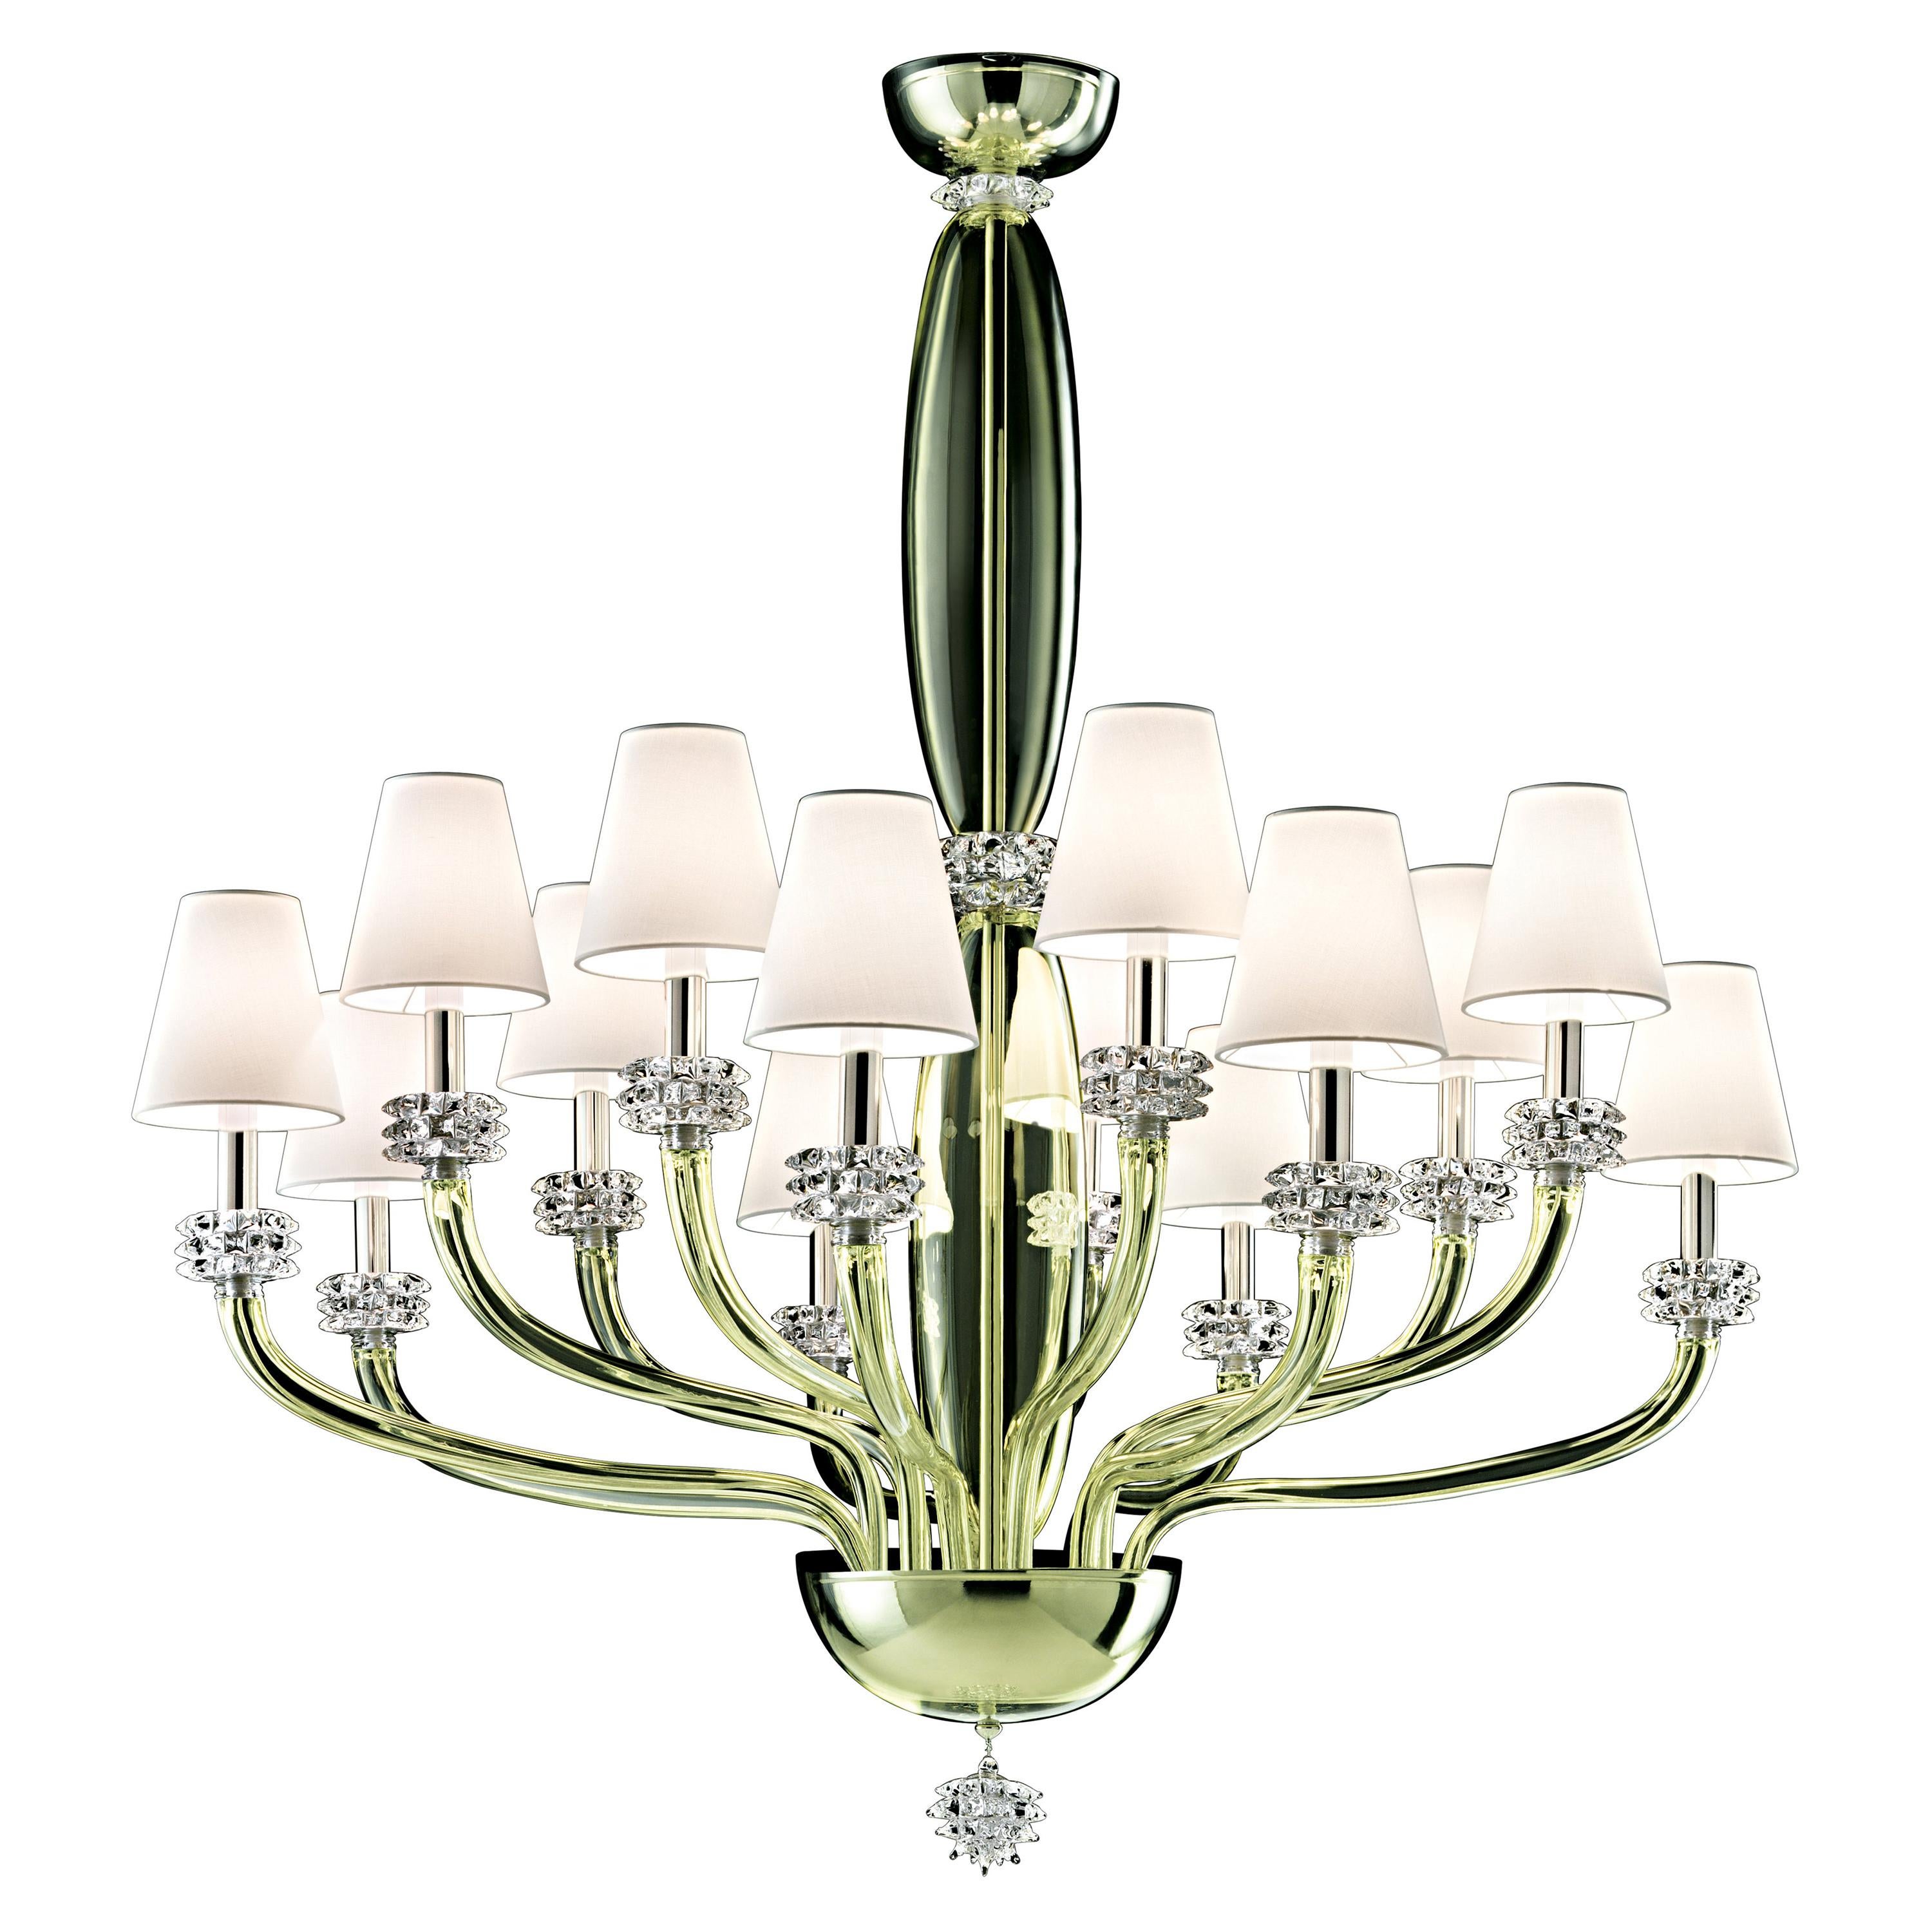 Green (Liquid Citron_EL) Rotterdam 5563 14 Chandelier in Glass with White Shade, by Barovier&Toso